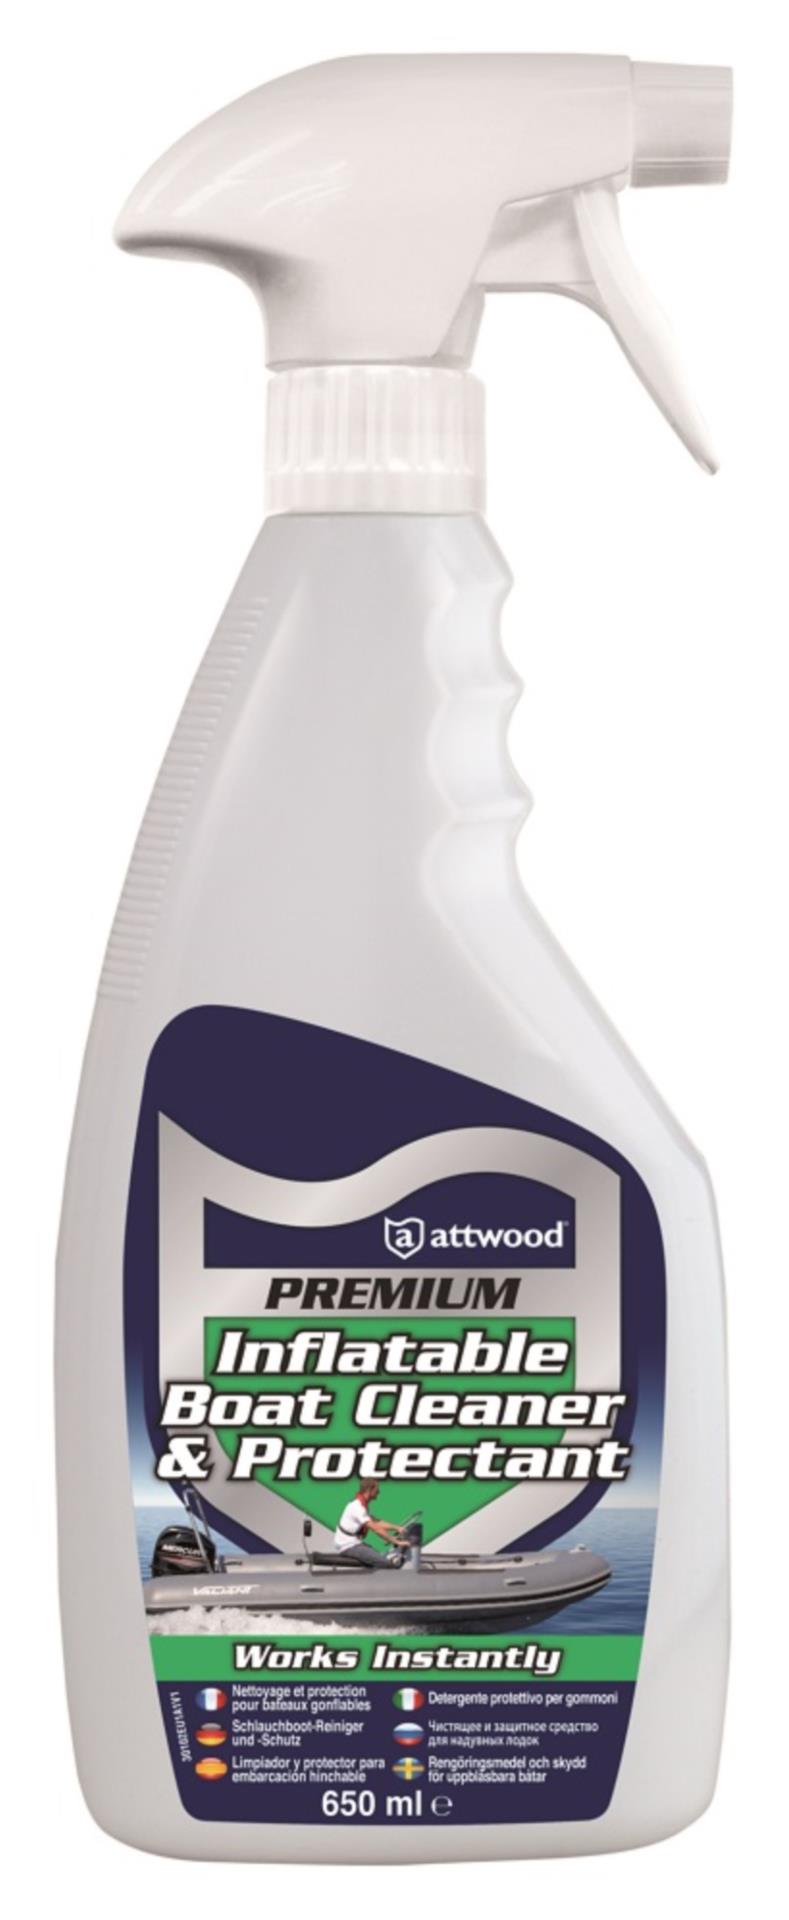 Attwood Premium Inflatable Boat Cleaner & Protectant 